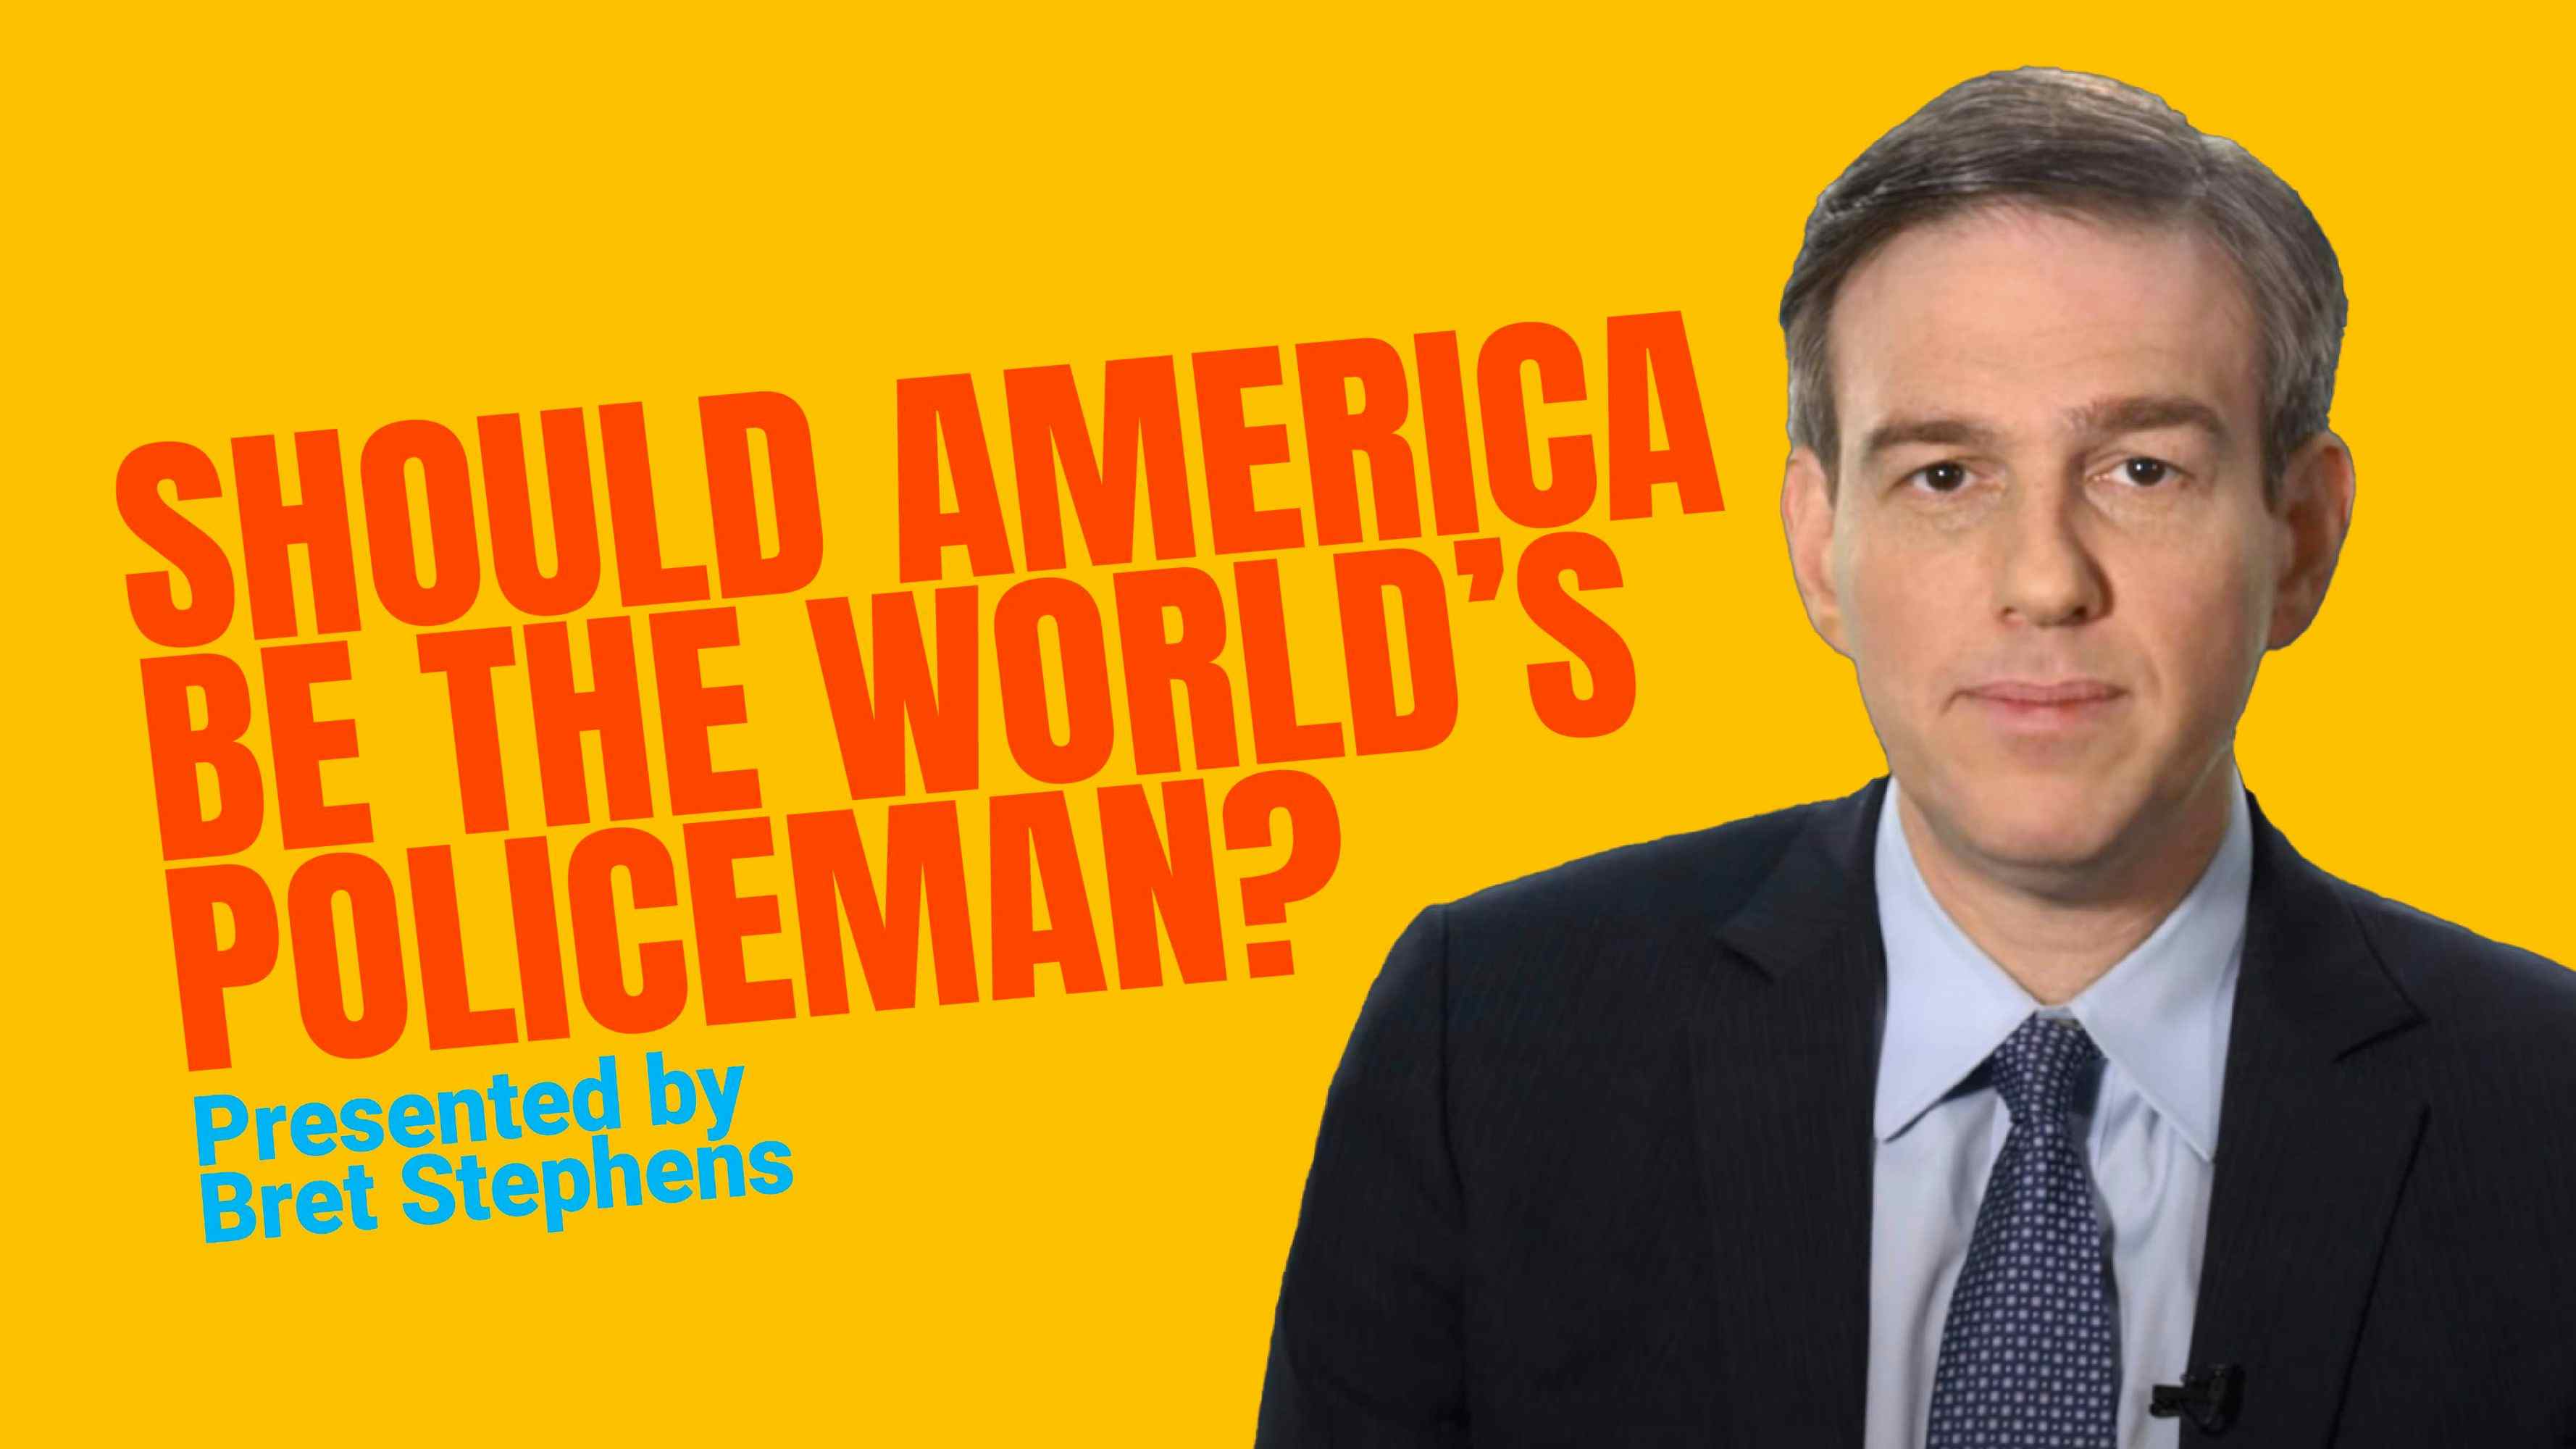 Should America Be the World's Policeman?